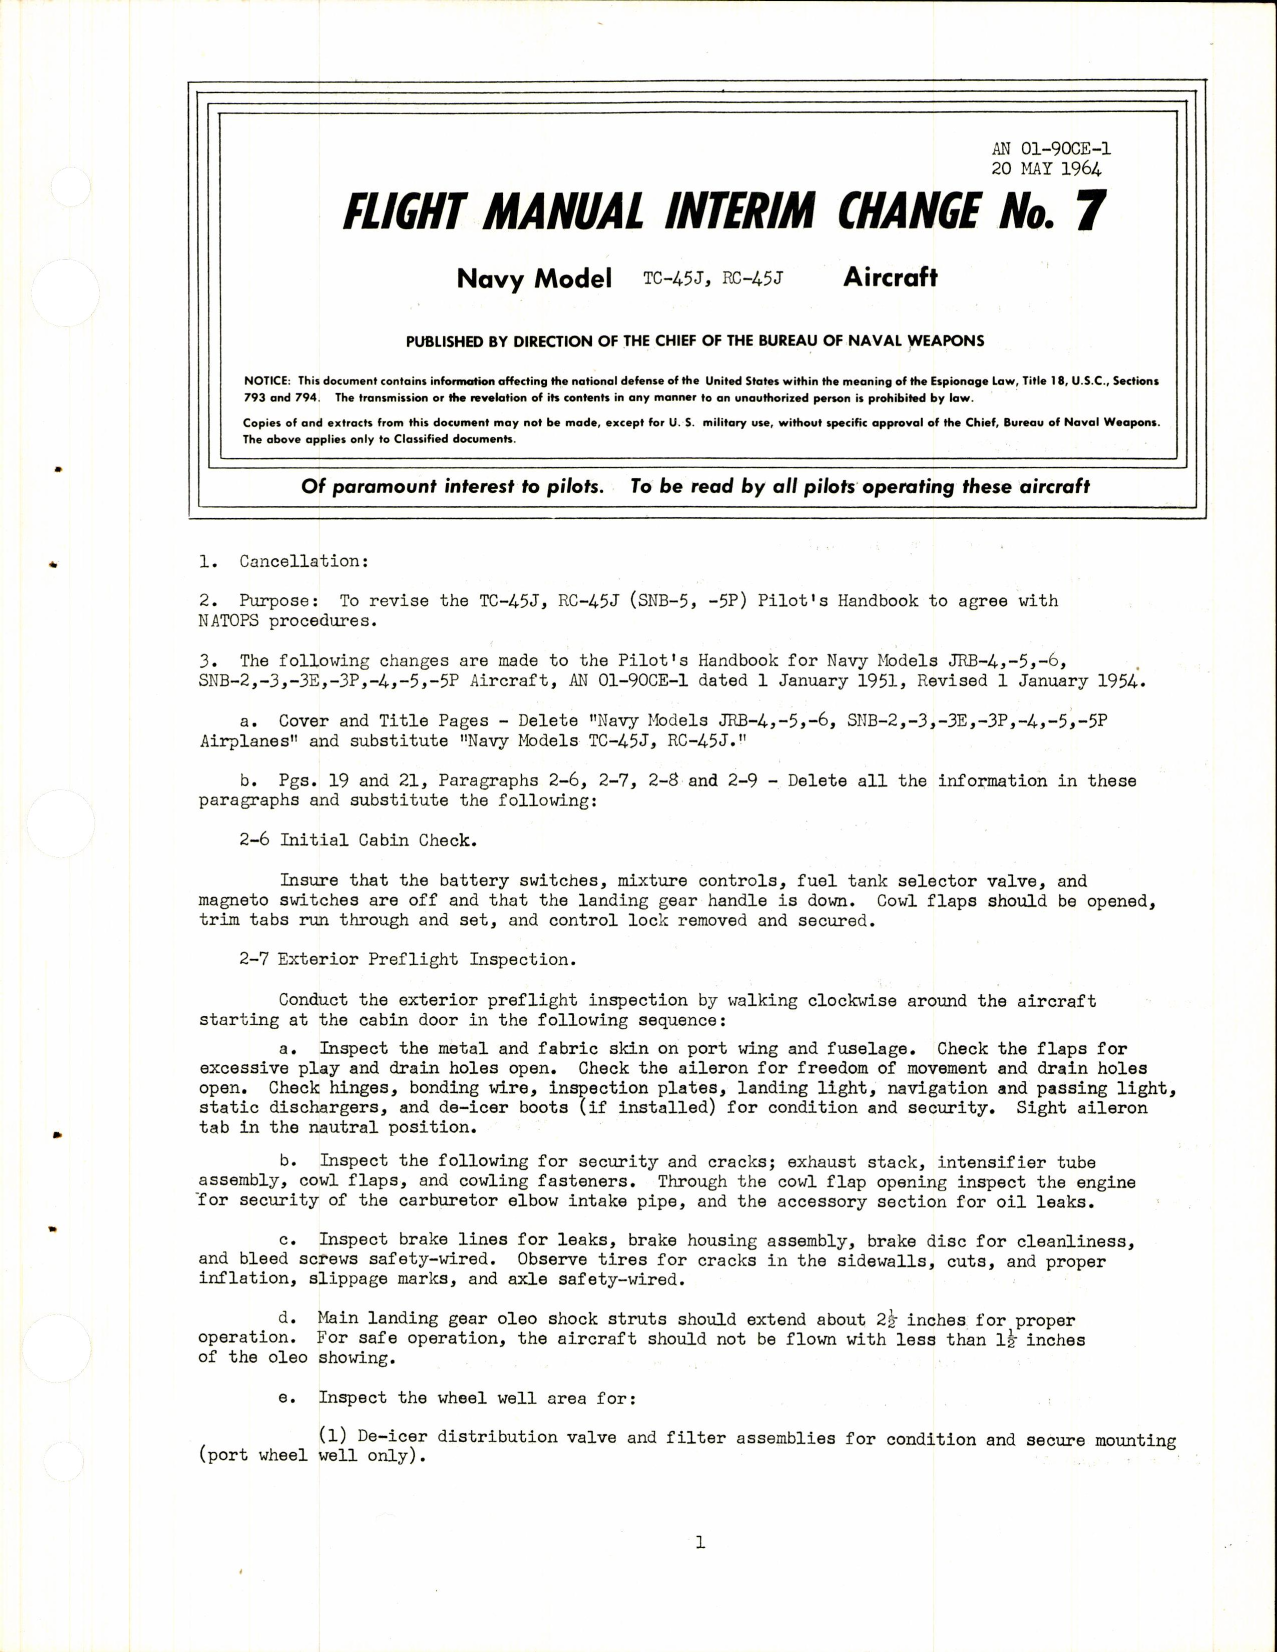 Sample page 5 from AirCorps Library document: Pilot's Handbook for RC-45J and UC-45J